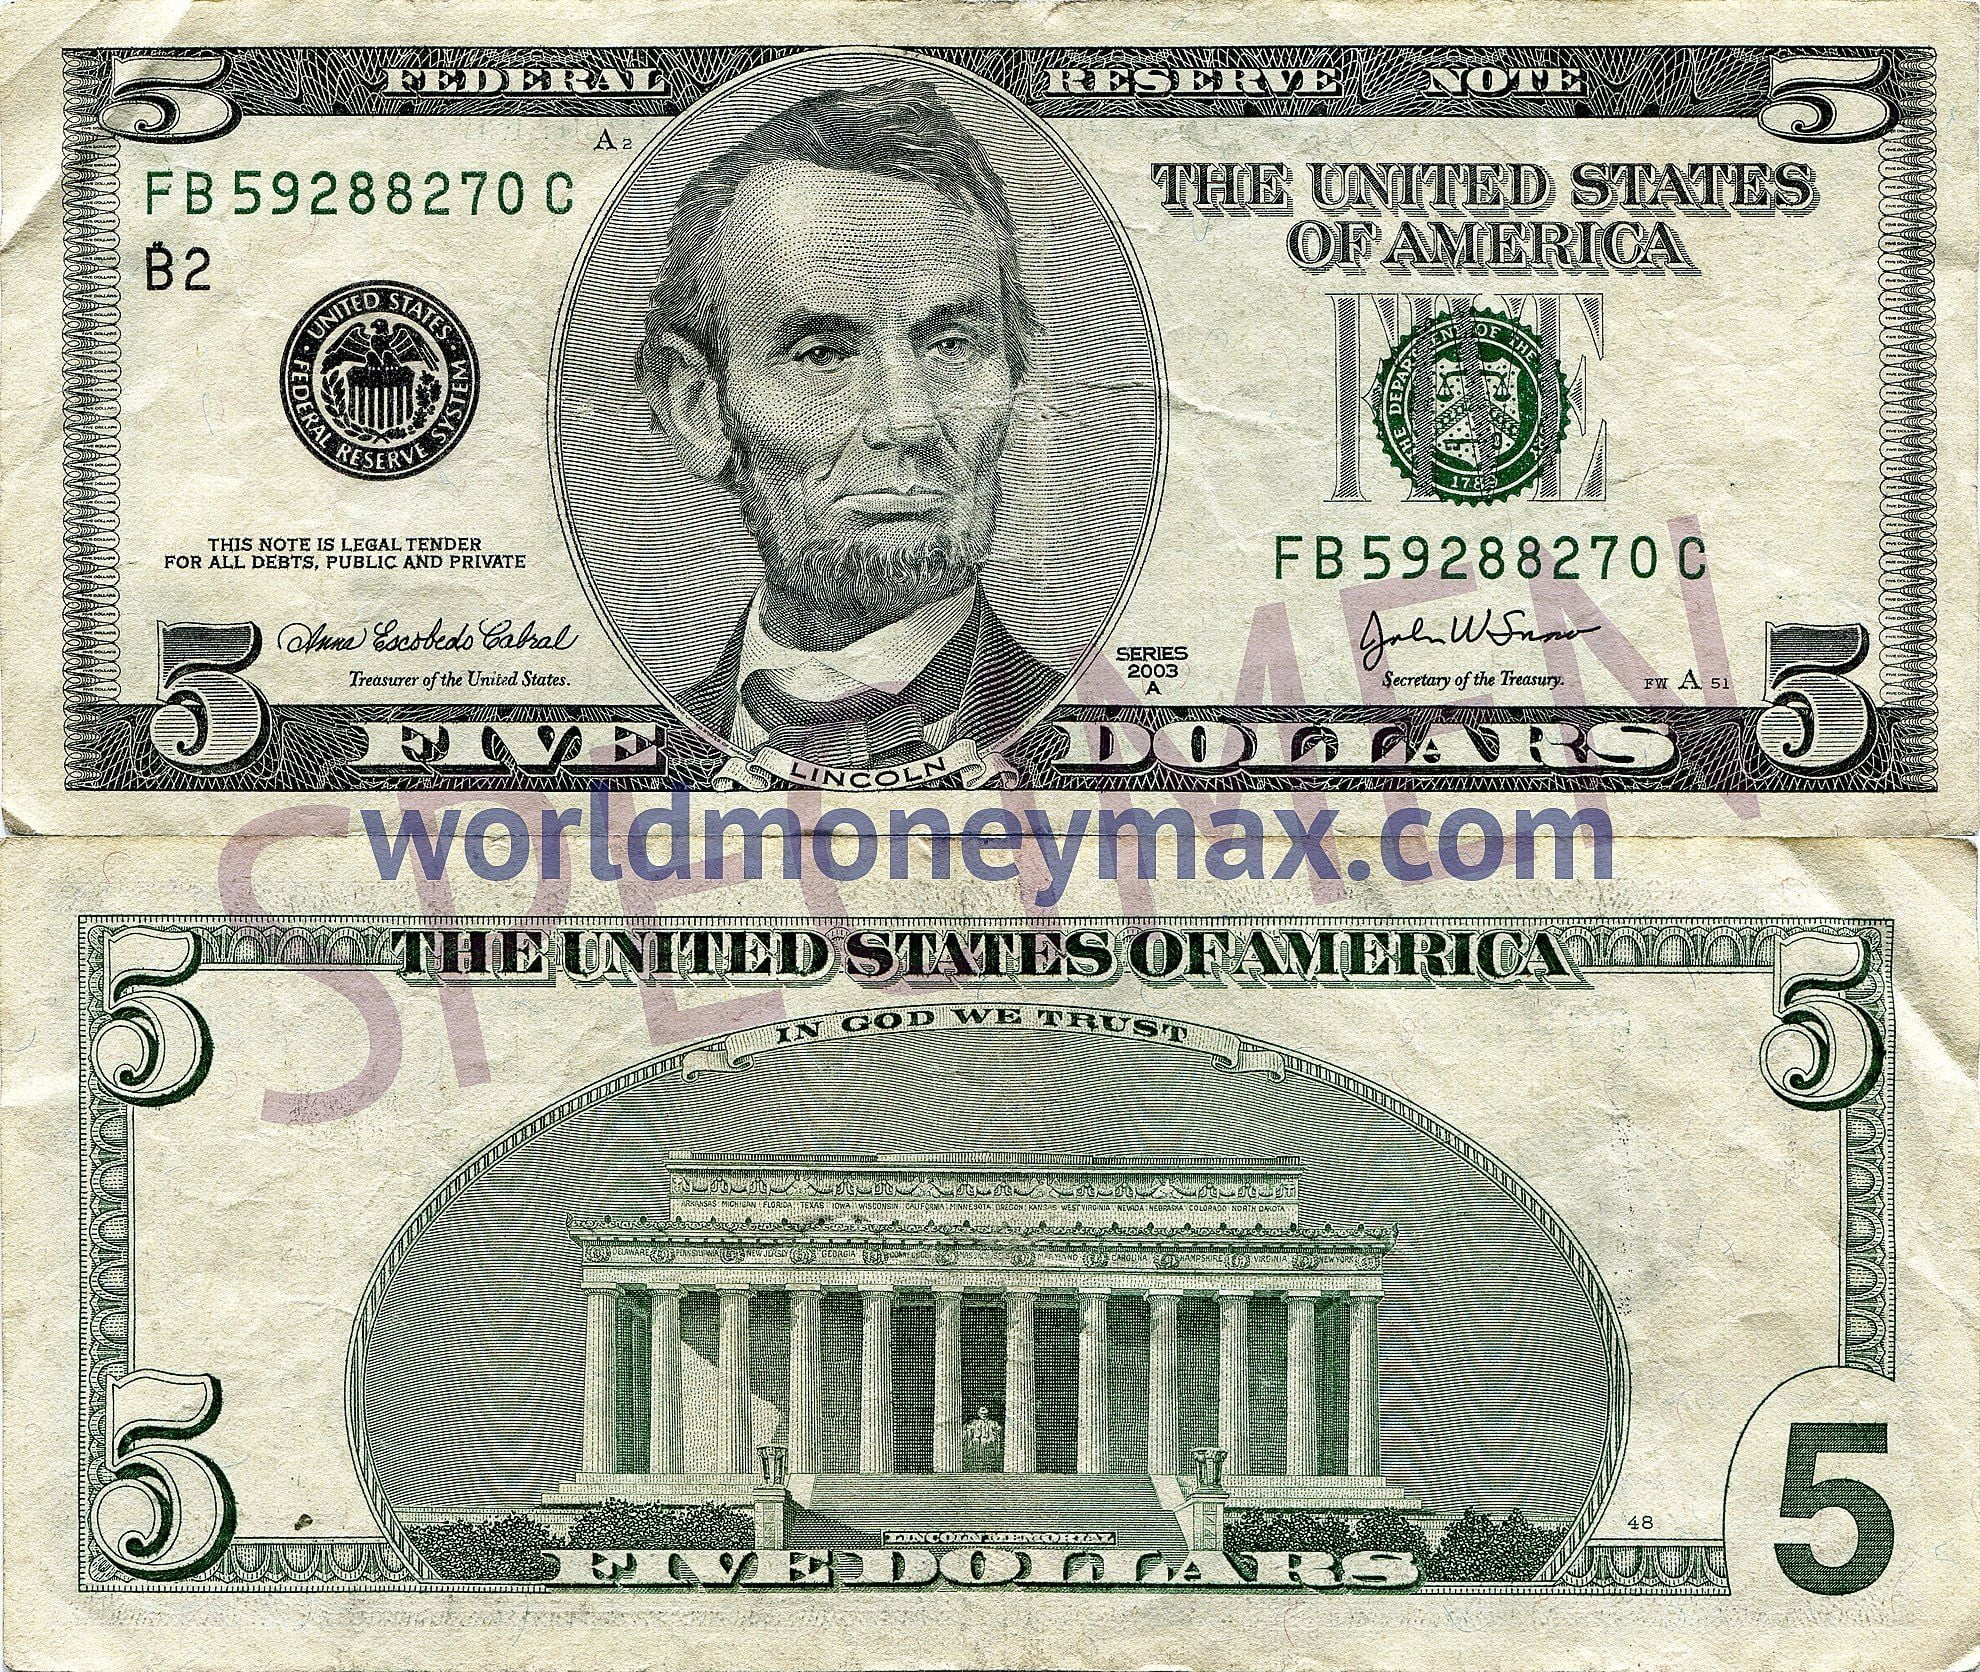 USA 5 Dollar 2003 Banknote 5 Federal Reserve Note FIVE DOLLARS THE UNITED STATES OF AMERICA Linkoln In In God We Trust Federal Reserve Note The Unit